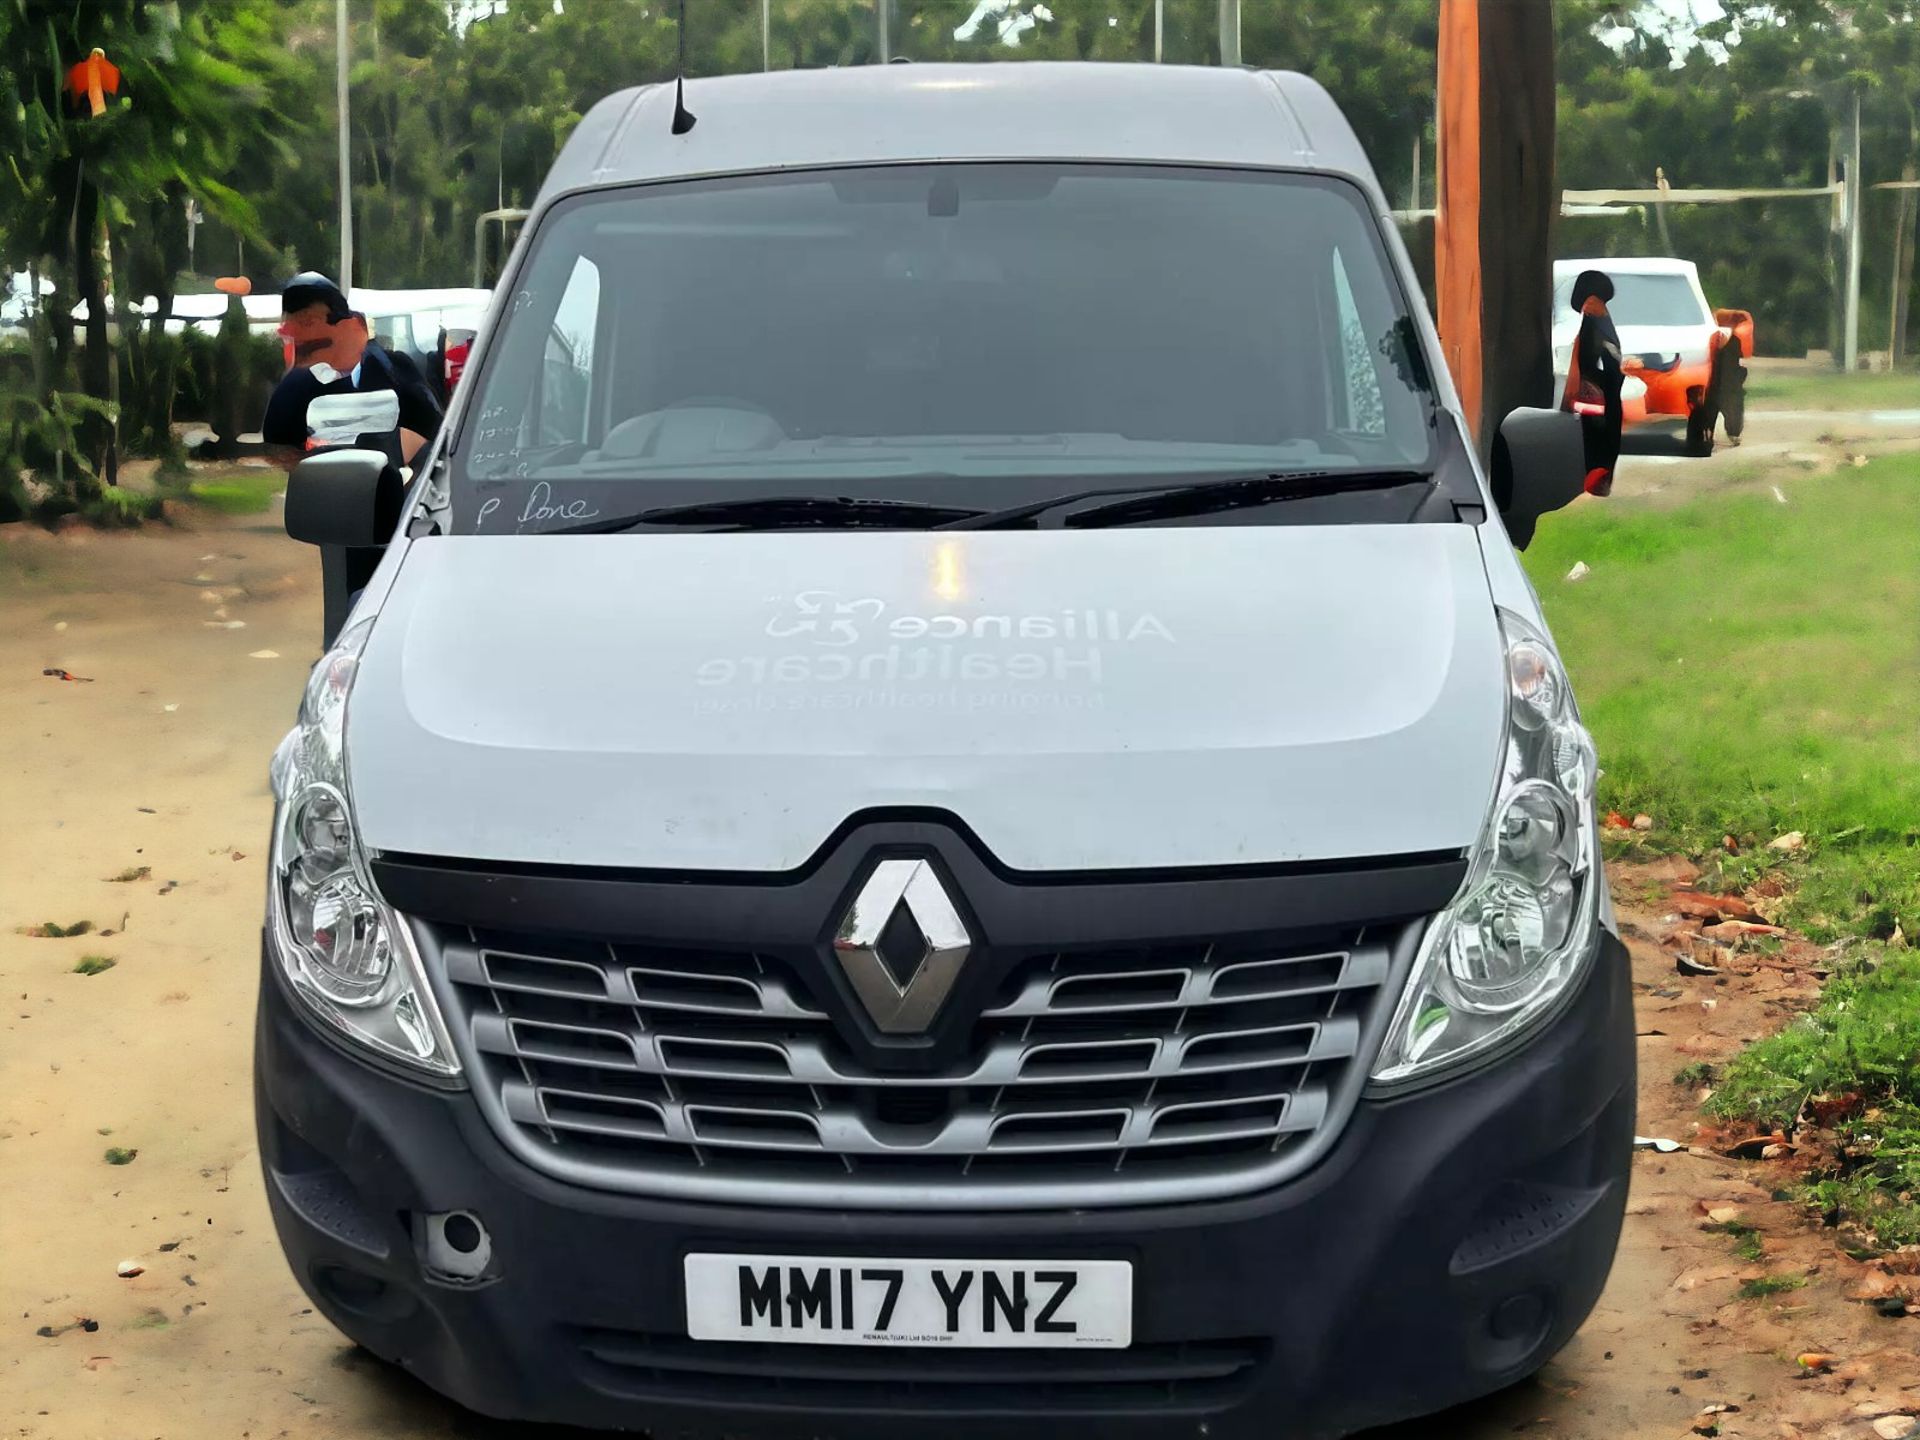 2017 RENAULT EXTRA LONG WHEEL BASE DIESEL VAN WITH COOLING SYSTEM - Image 2 of 16